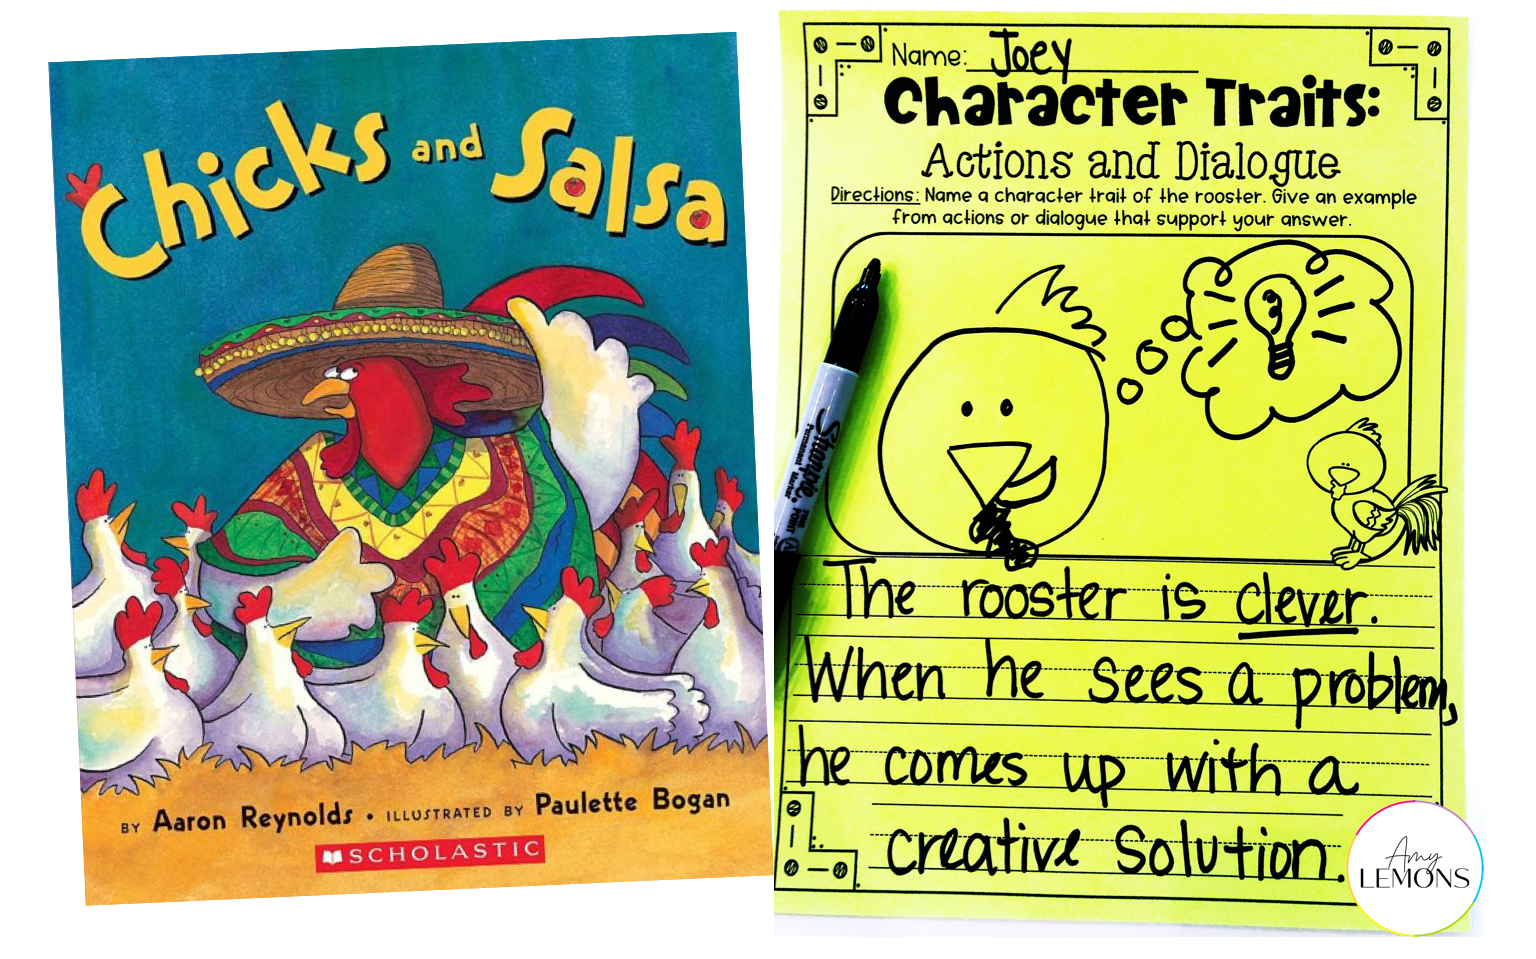 Reading comprehension activities for the book Chicks and Salsa